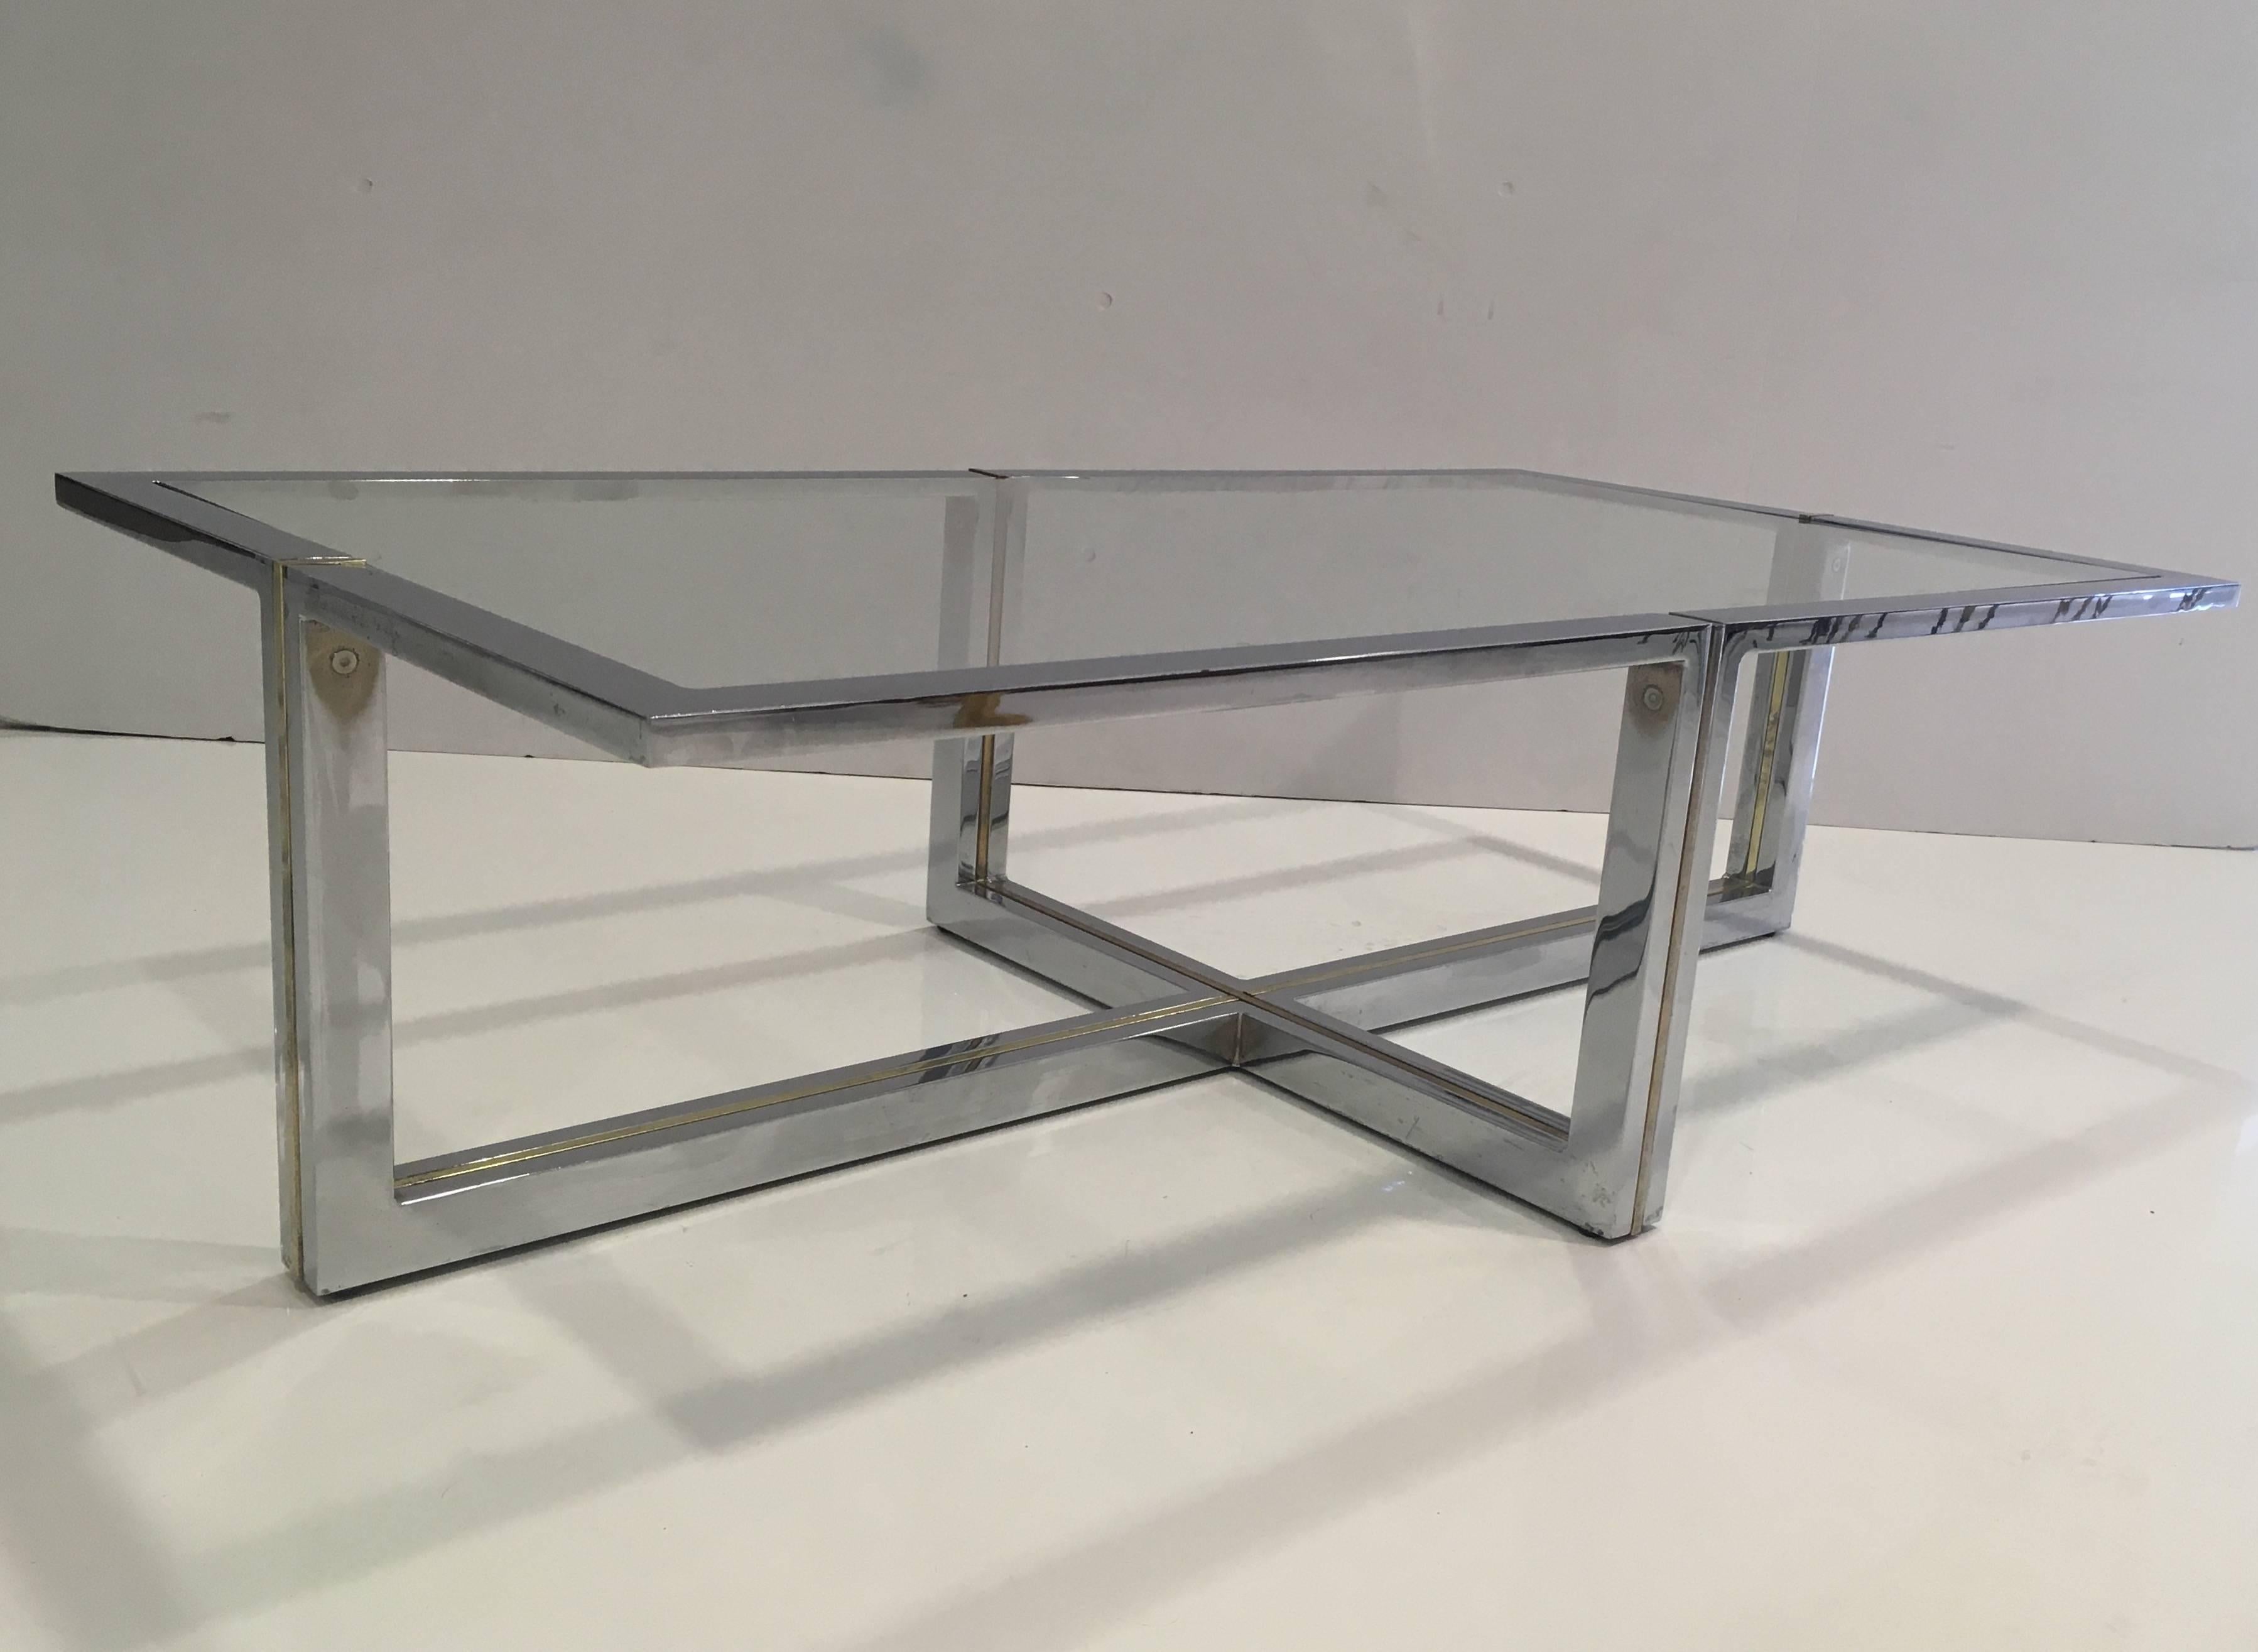 This elegant designed coffee table has a chrome finish with brass detailing inlay. New glass top.